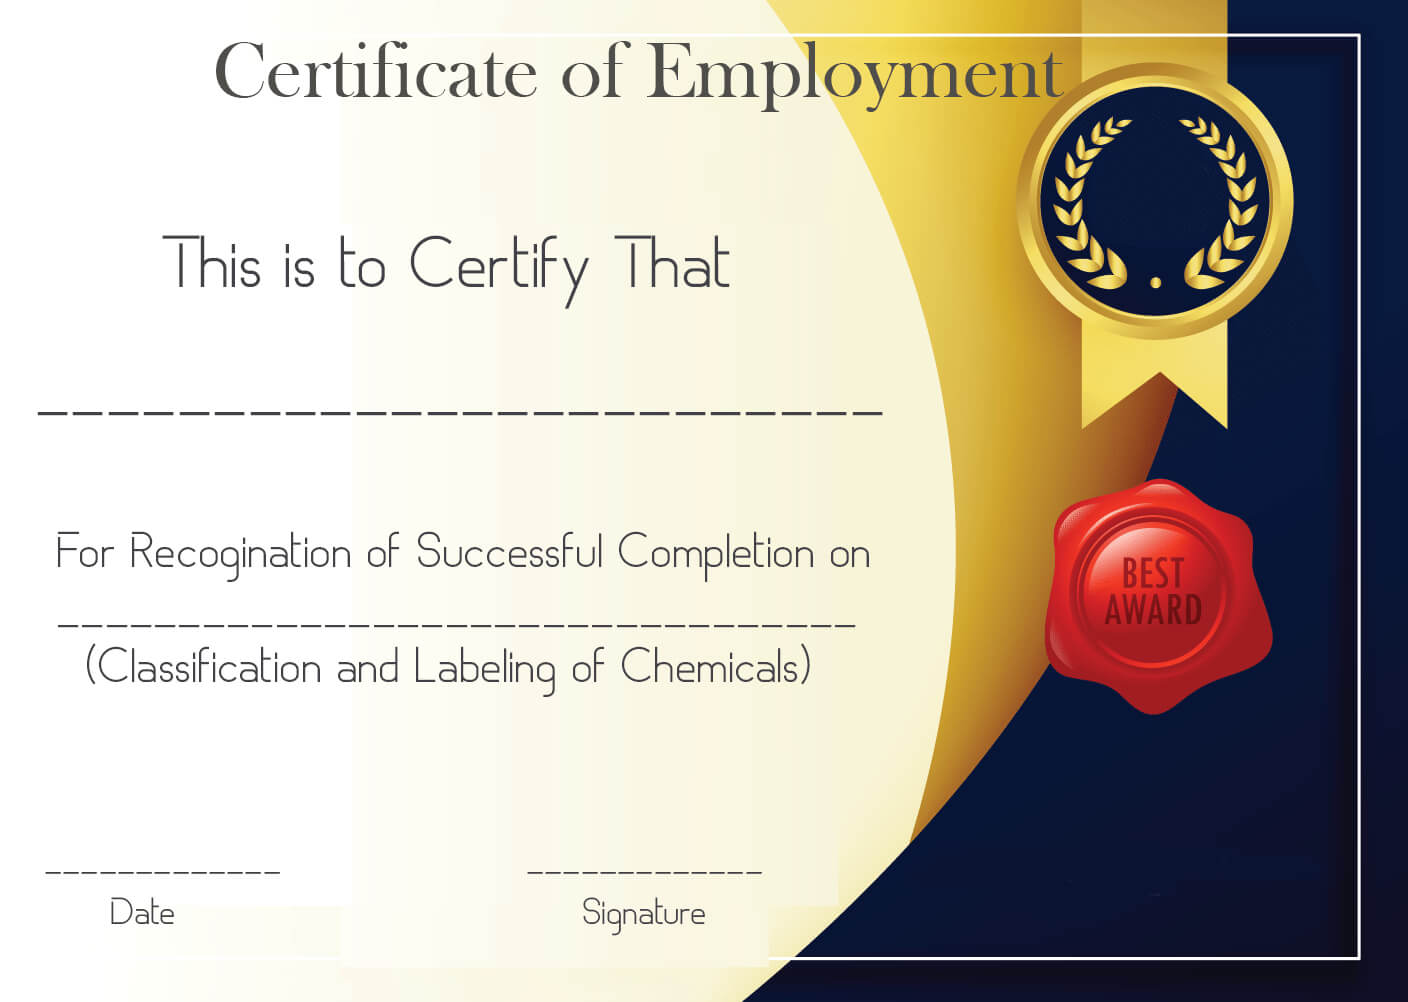 Free Sample Certificate Of Employment Template | Certificate Throughout Best Performance Certificate Template